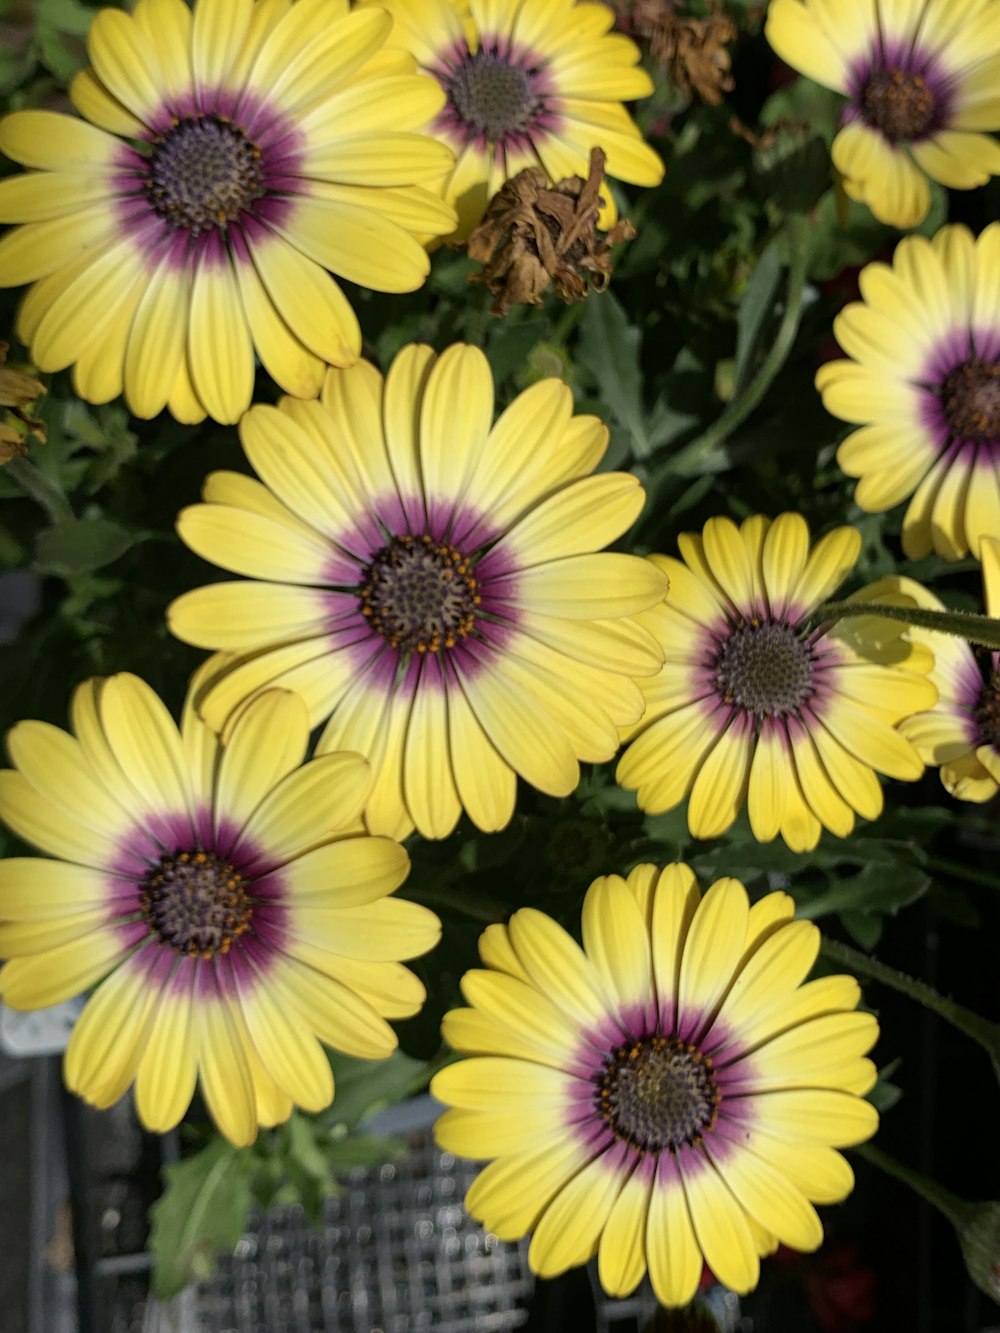 purple and yellow flowers in close up photography